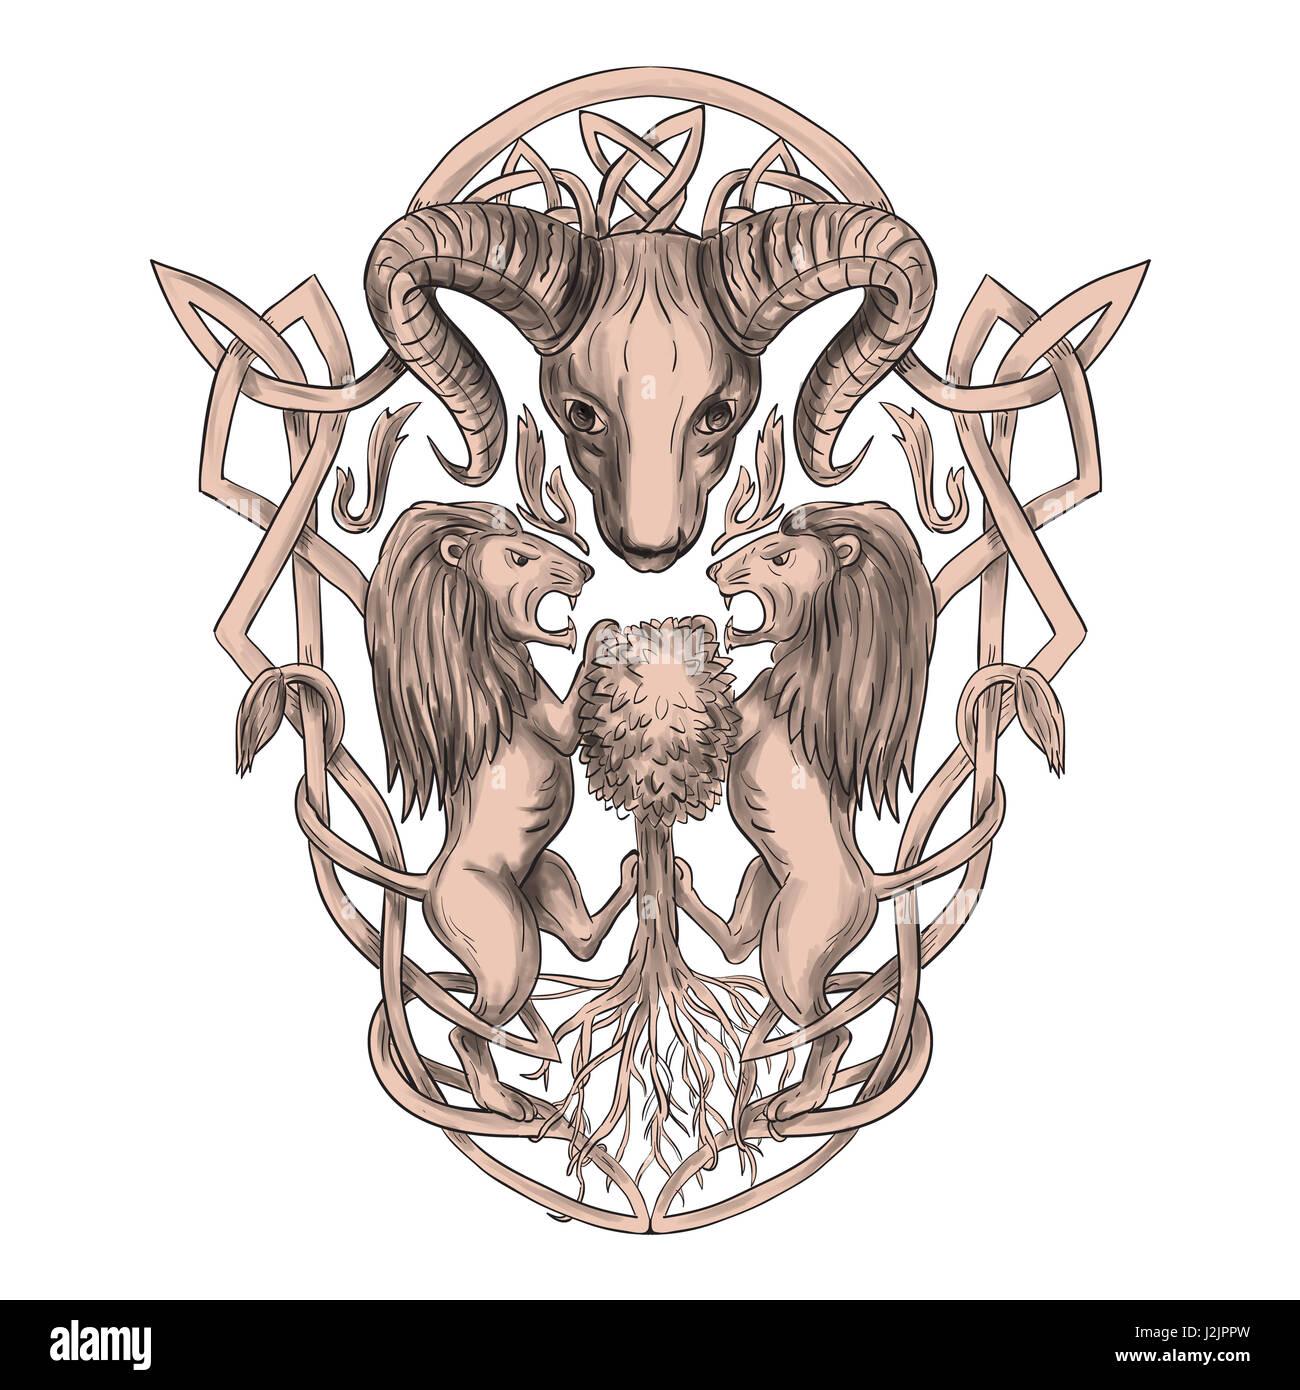 Tattoo style illustration of stylized bighorn sheep head with two lion supporters climbing on tree with Celtic knot, called Icovellavna, plait work or Stock Photo